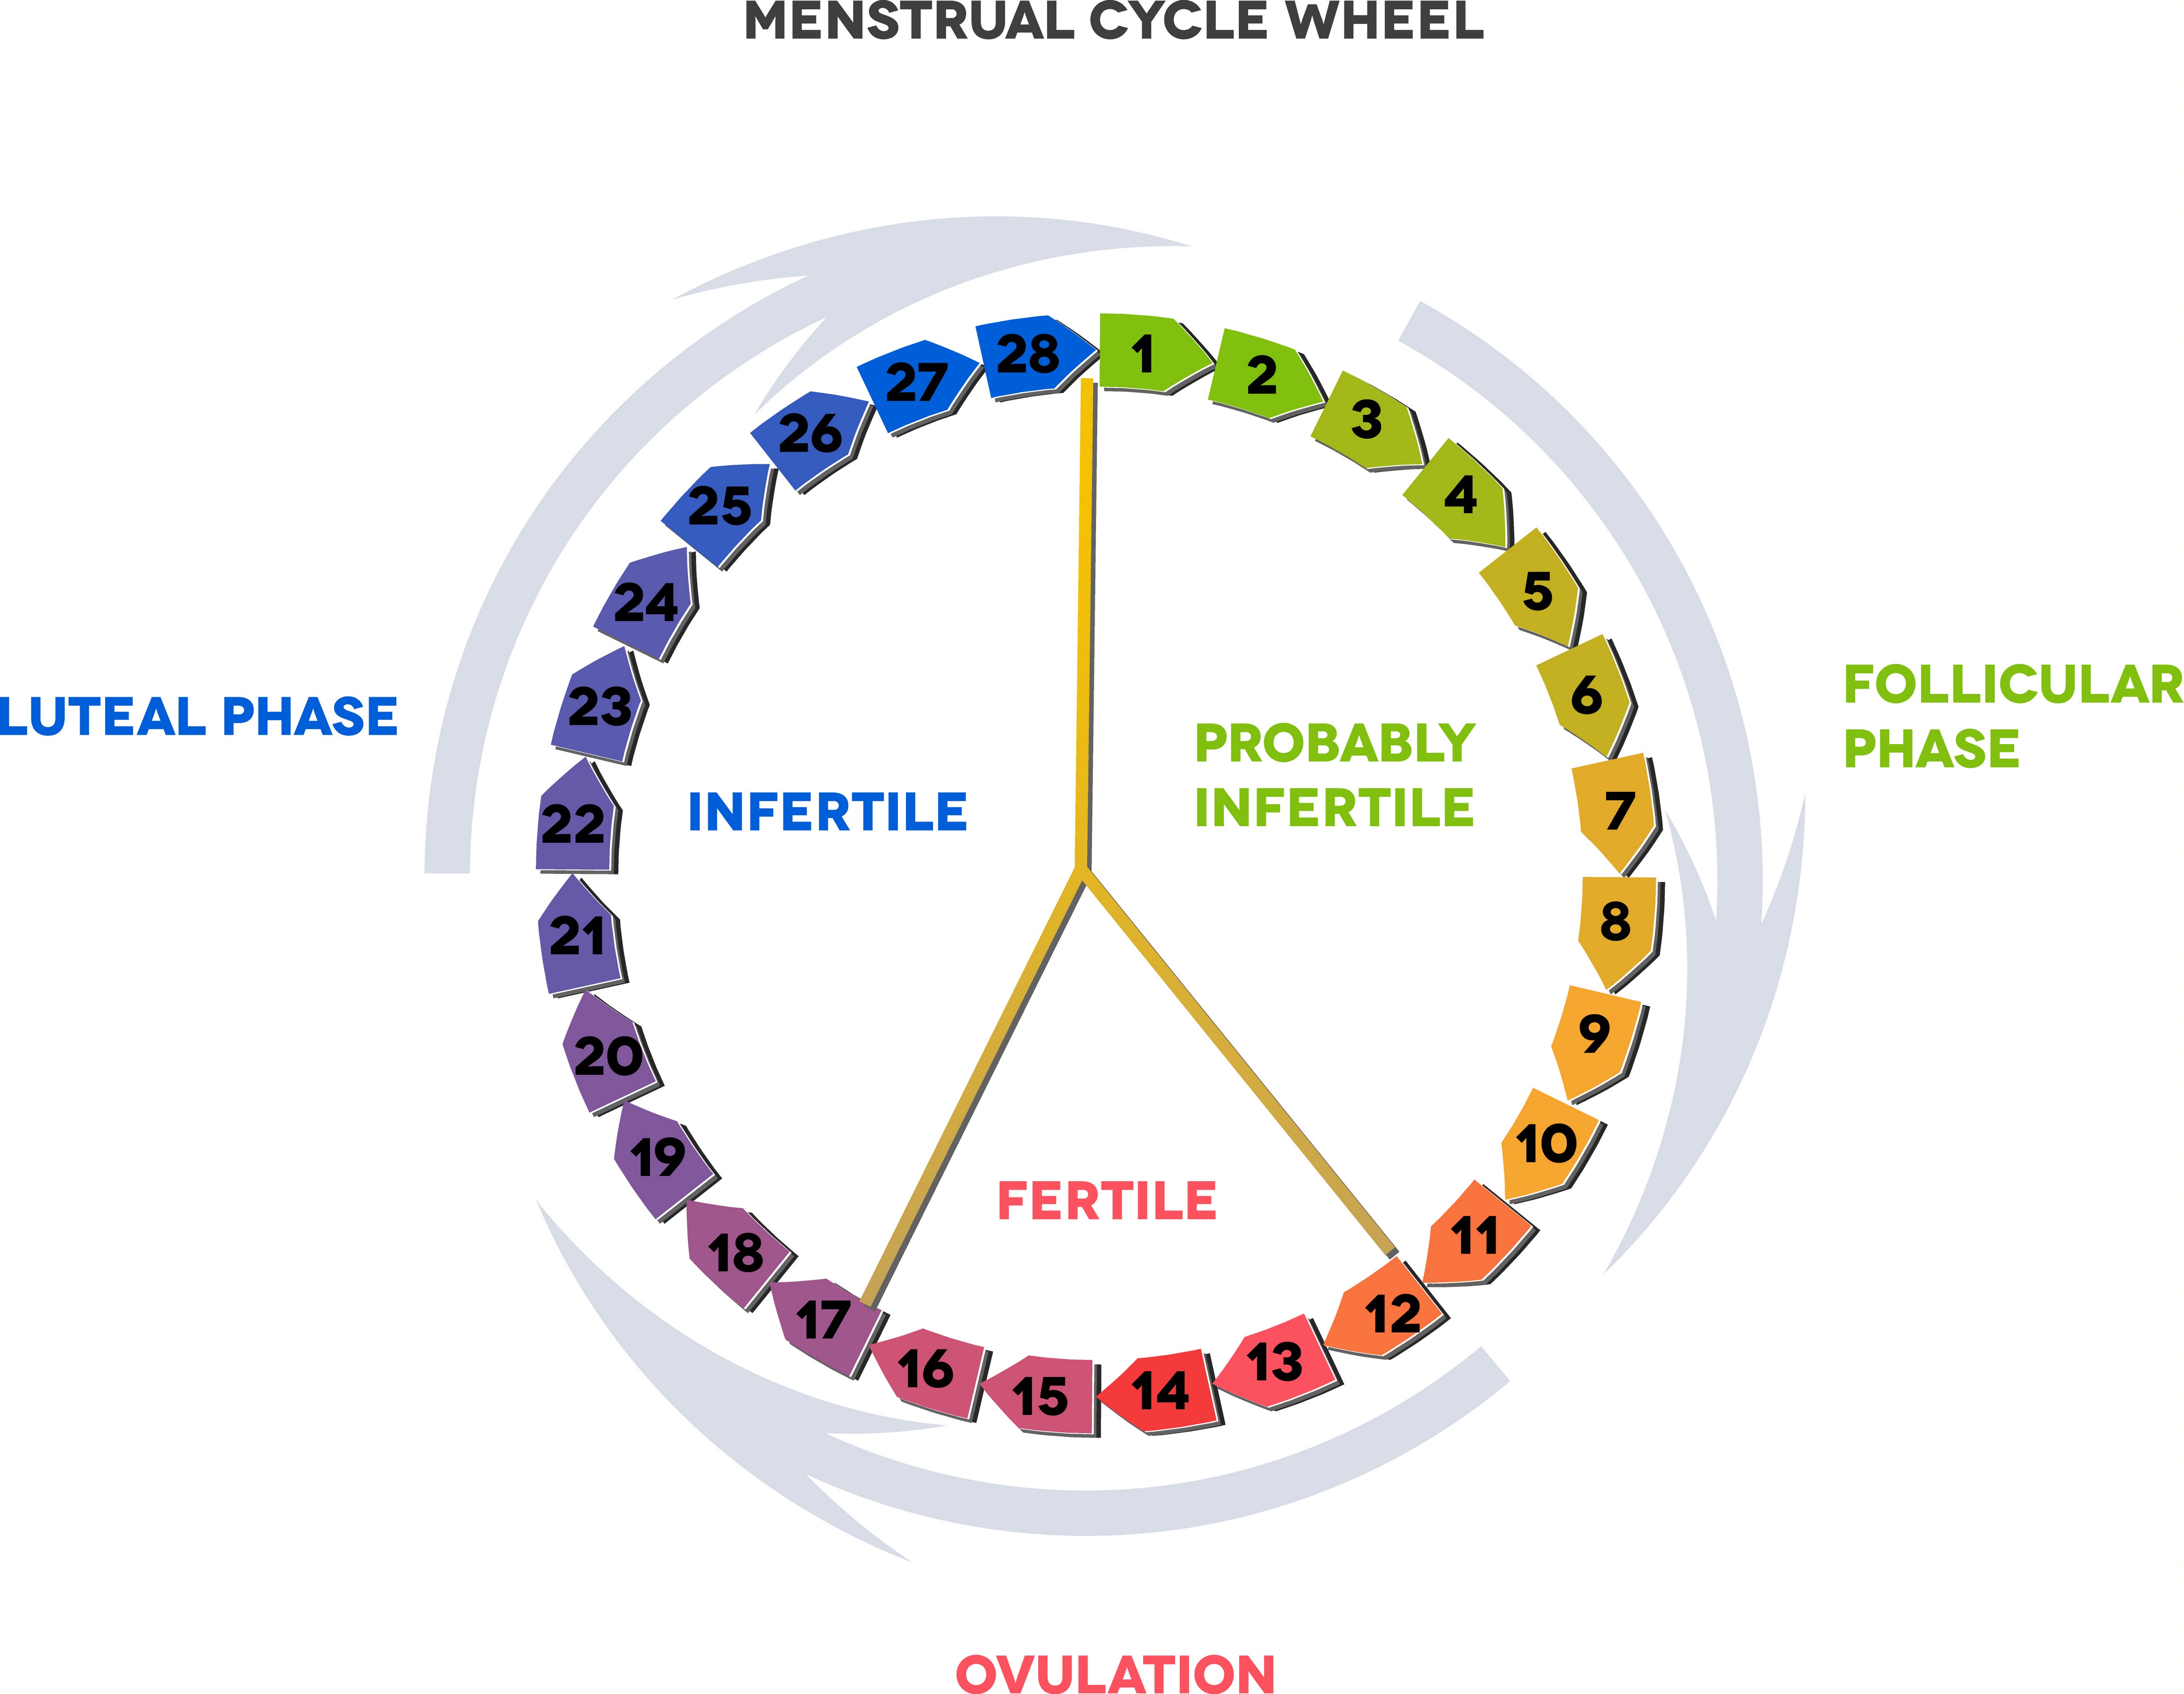 ever wondered how many months do you ovulate? we've got the answer!